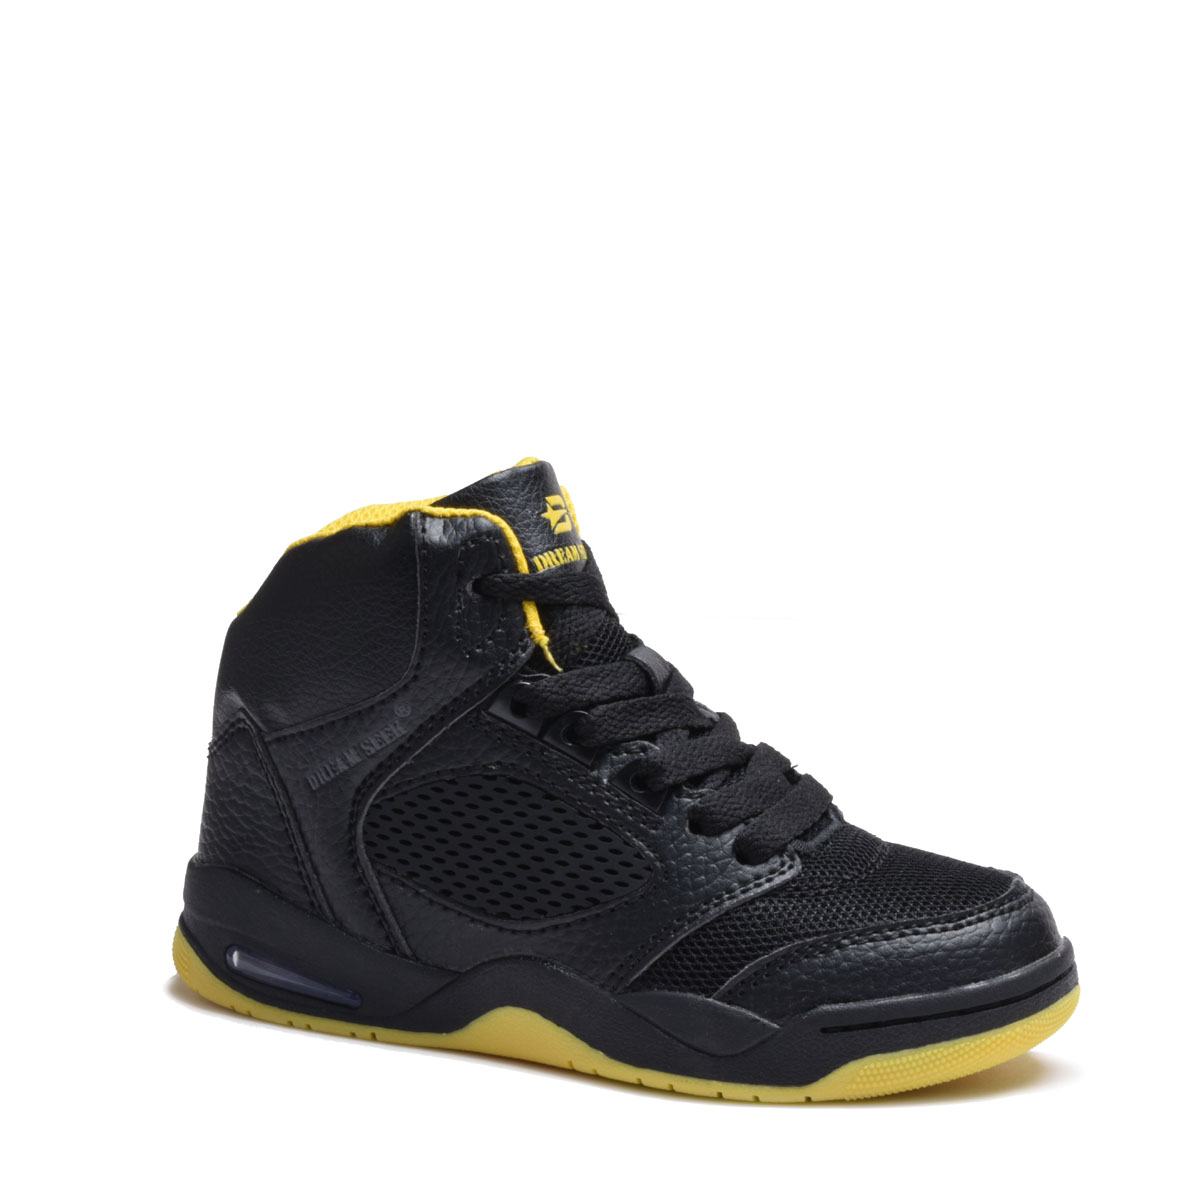 Boys' Basketball Sneakers High Top Kids Shoes - 3 Colors Beige/Black, Black/Red or Black/Yellow - Sizes 10-4 - image 1 of 6